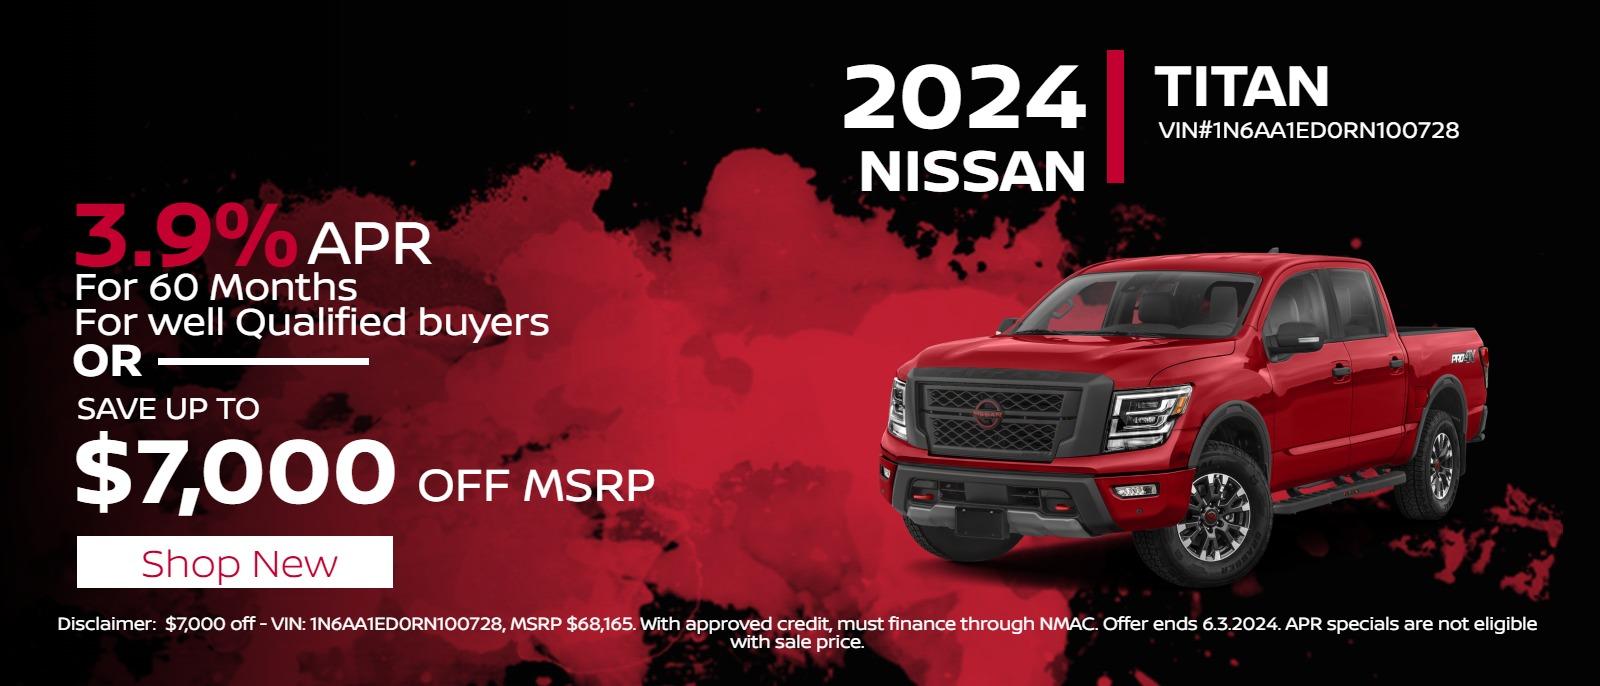 Titan
2024 Nissan Titan
Save up to
$7,000
Off MSRP

Or

3.9%
APR Financing
For 60mos.
For well Qualified buyers